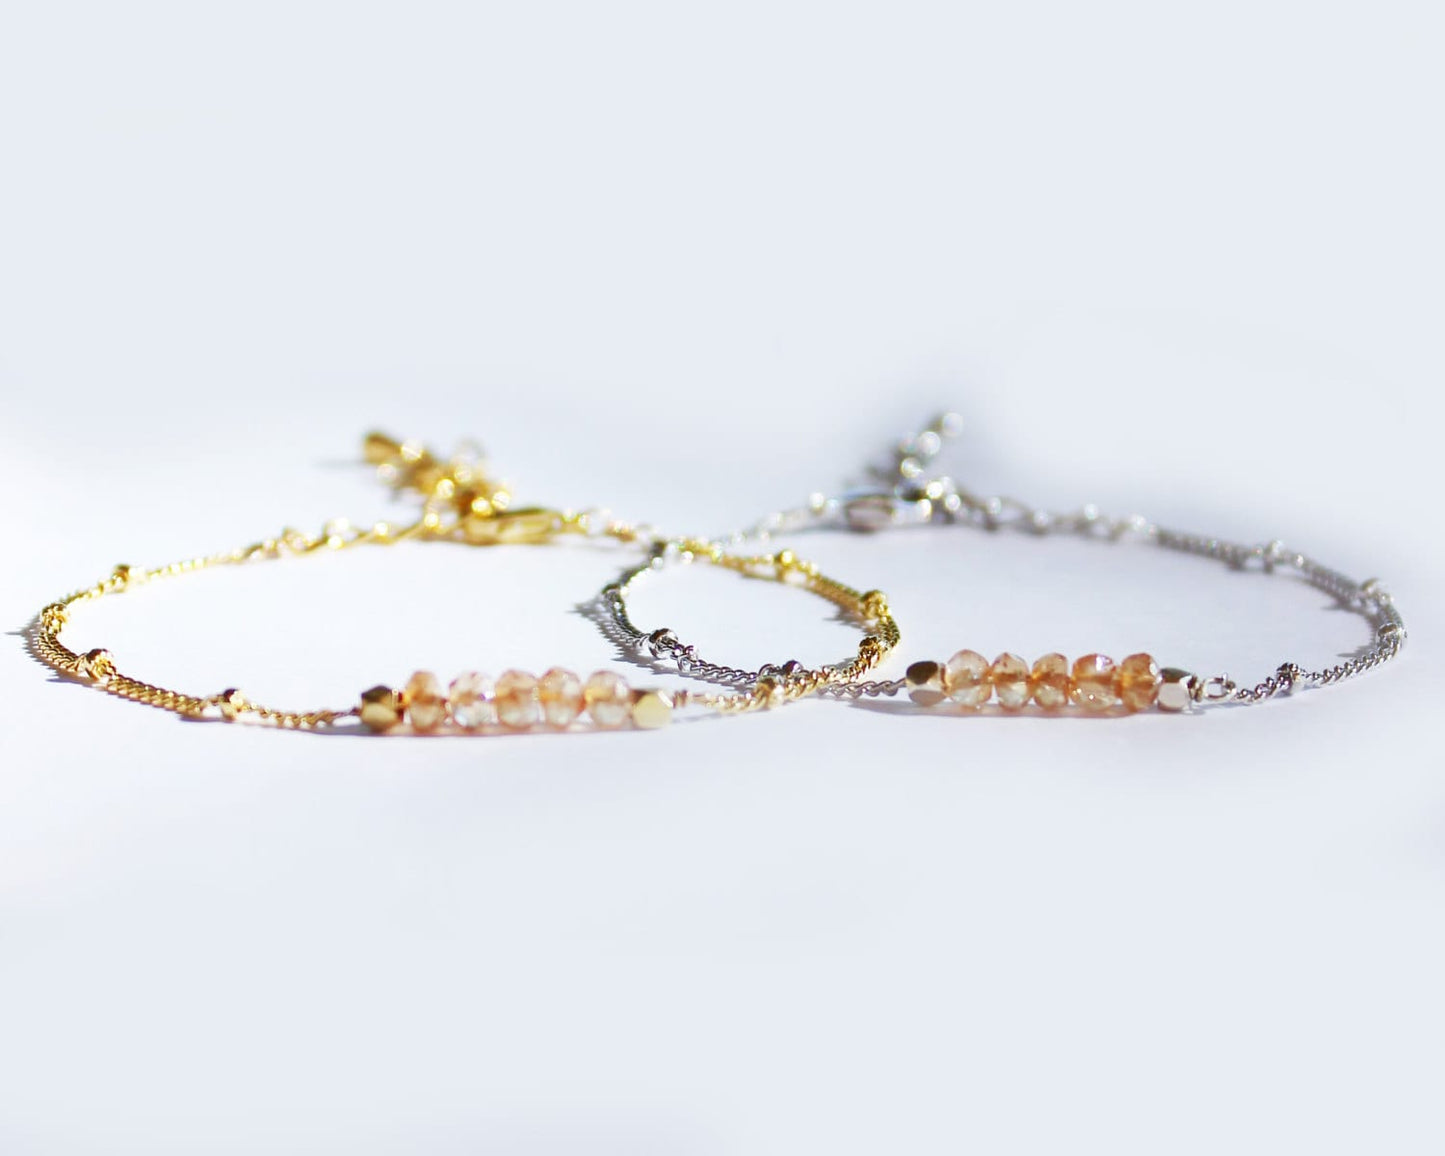 Citrine and Gold Bracelet - 14K Gold Filled or Gold Plated - Birthstone Jewelry - November Birthstone - Satellite Chain Brace